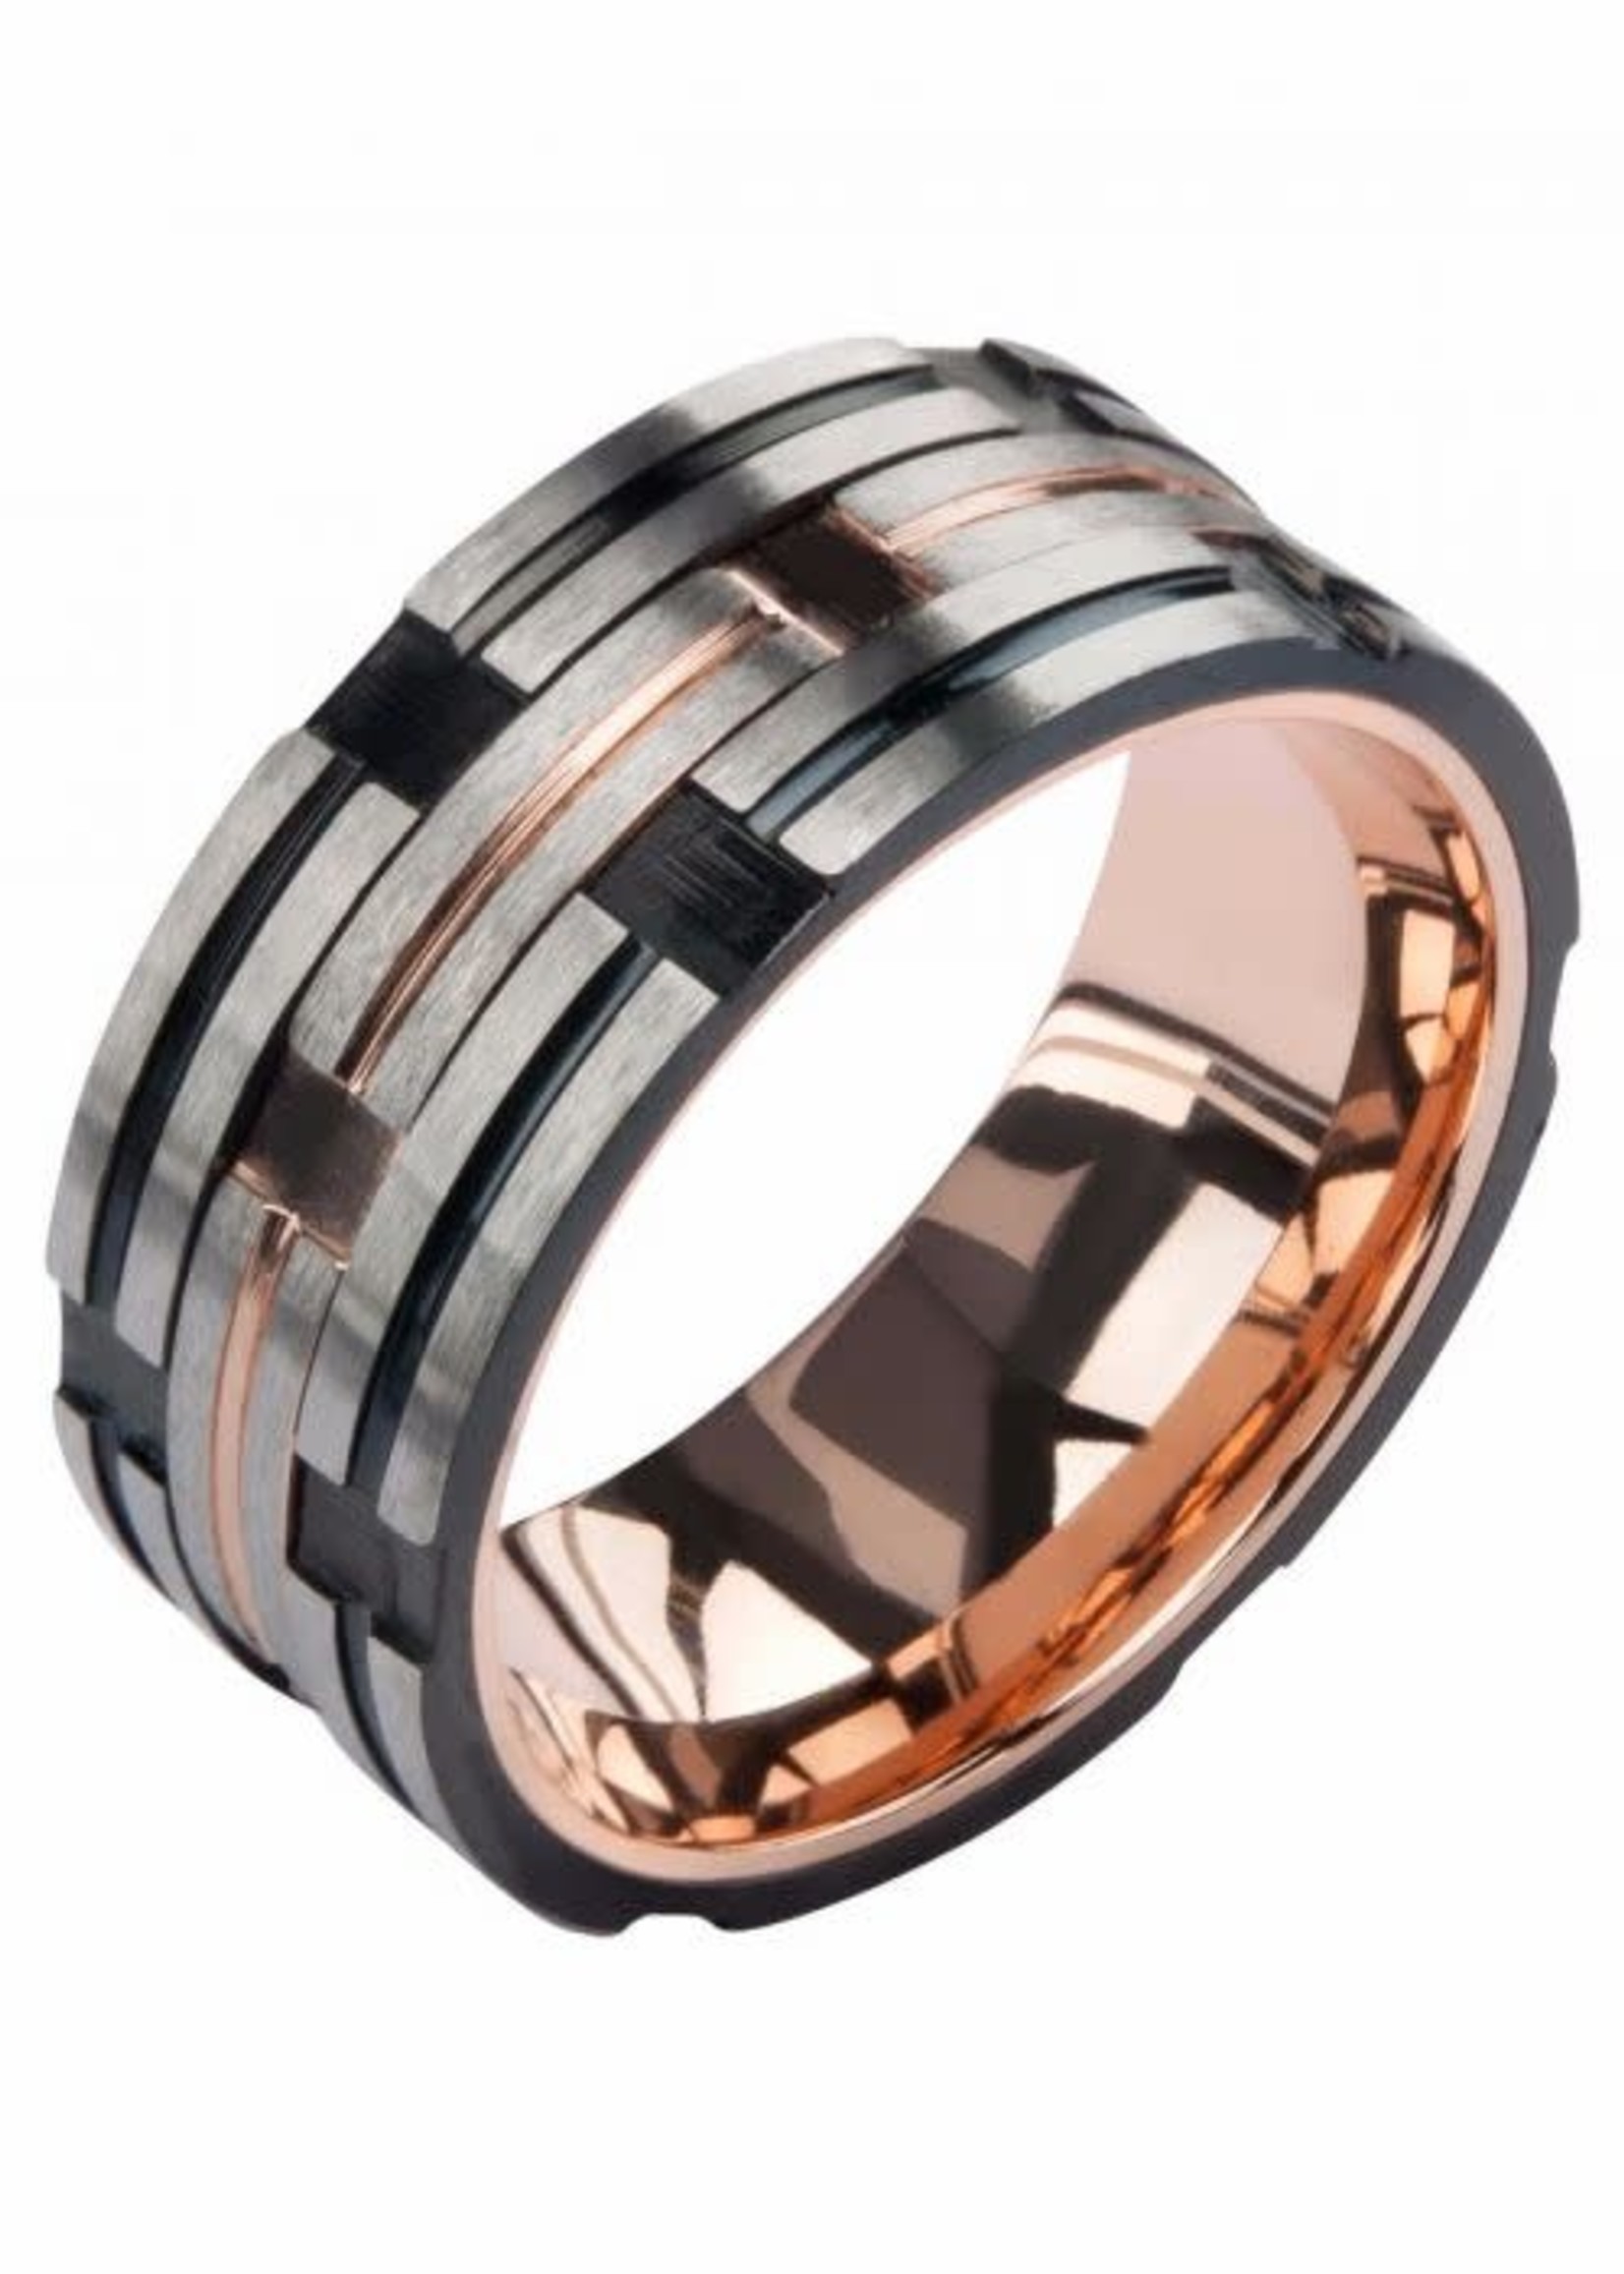 INOX Black Track in Plated Rose Gold Ring SZ 11